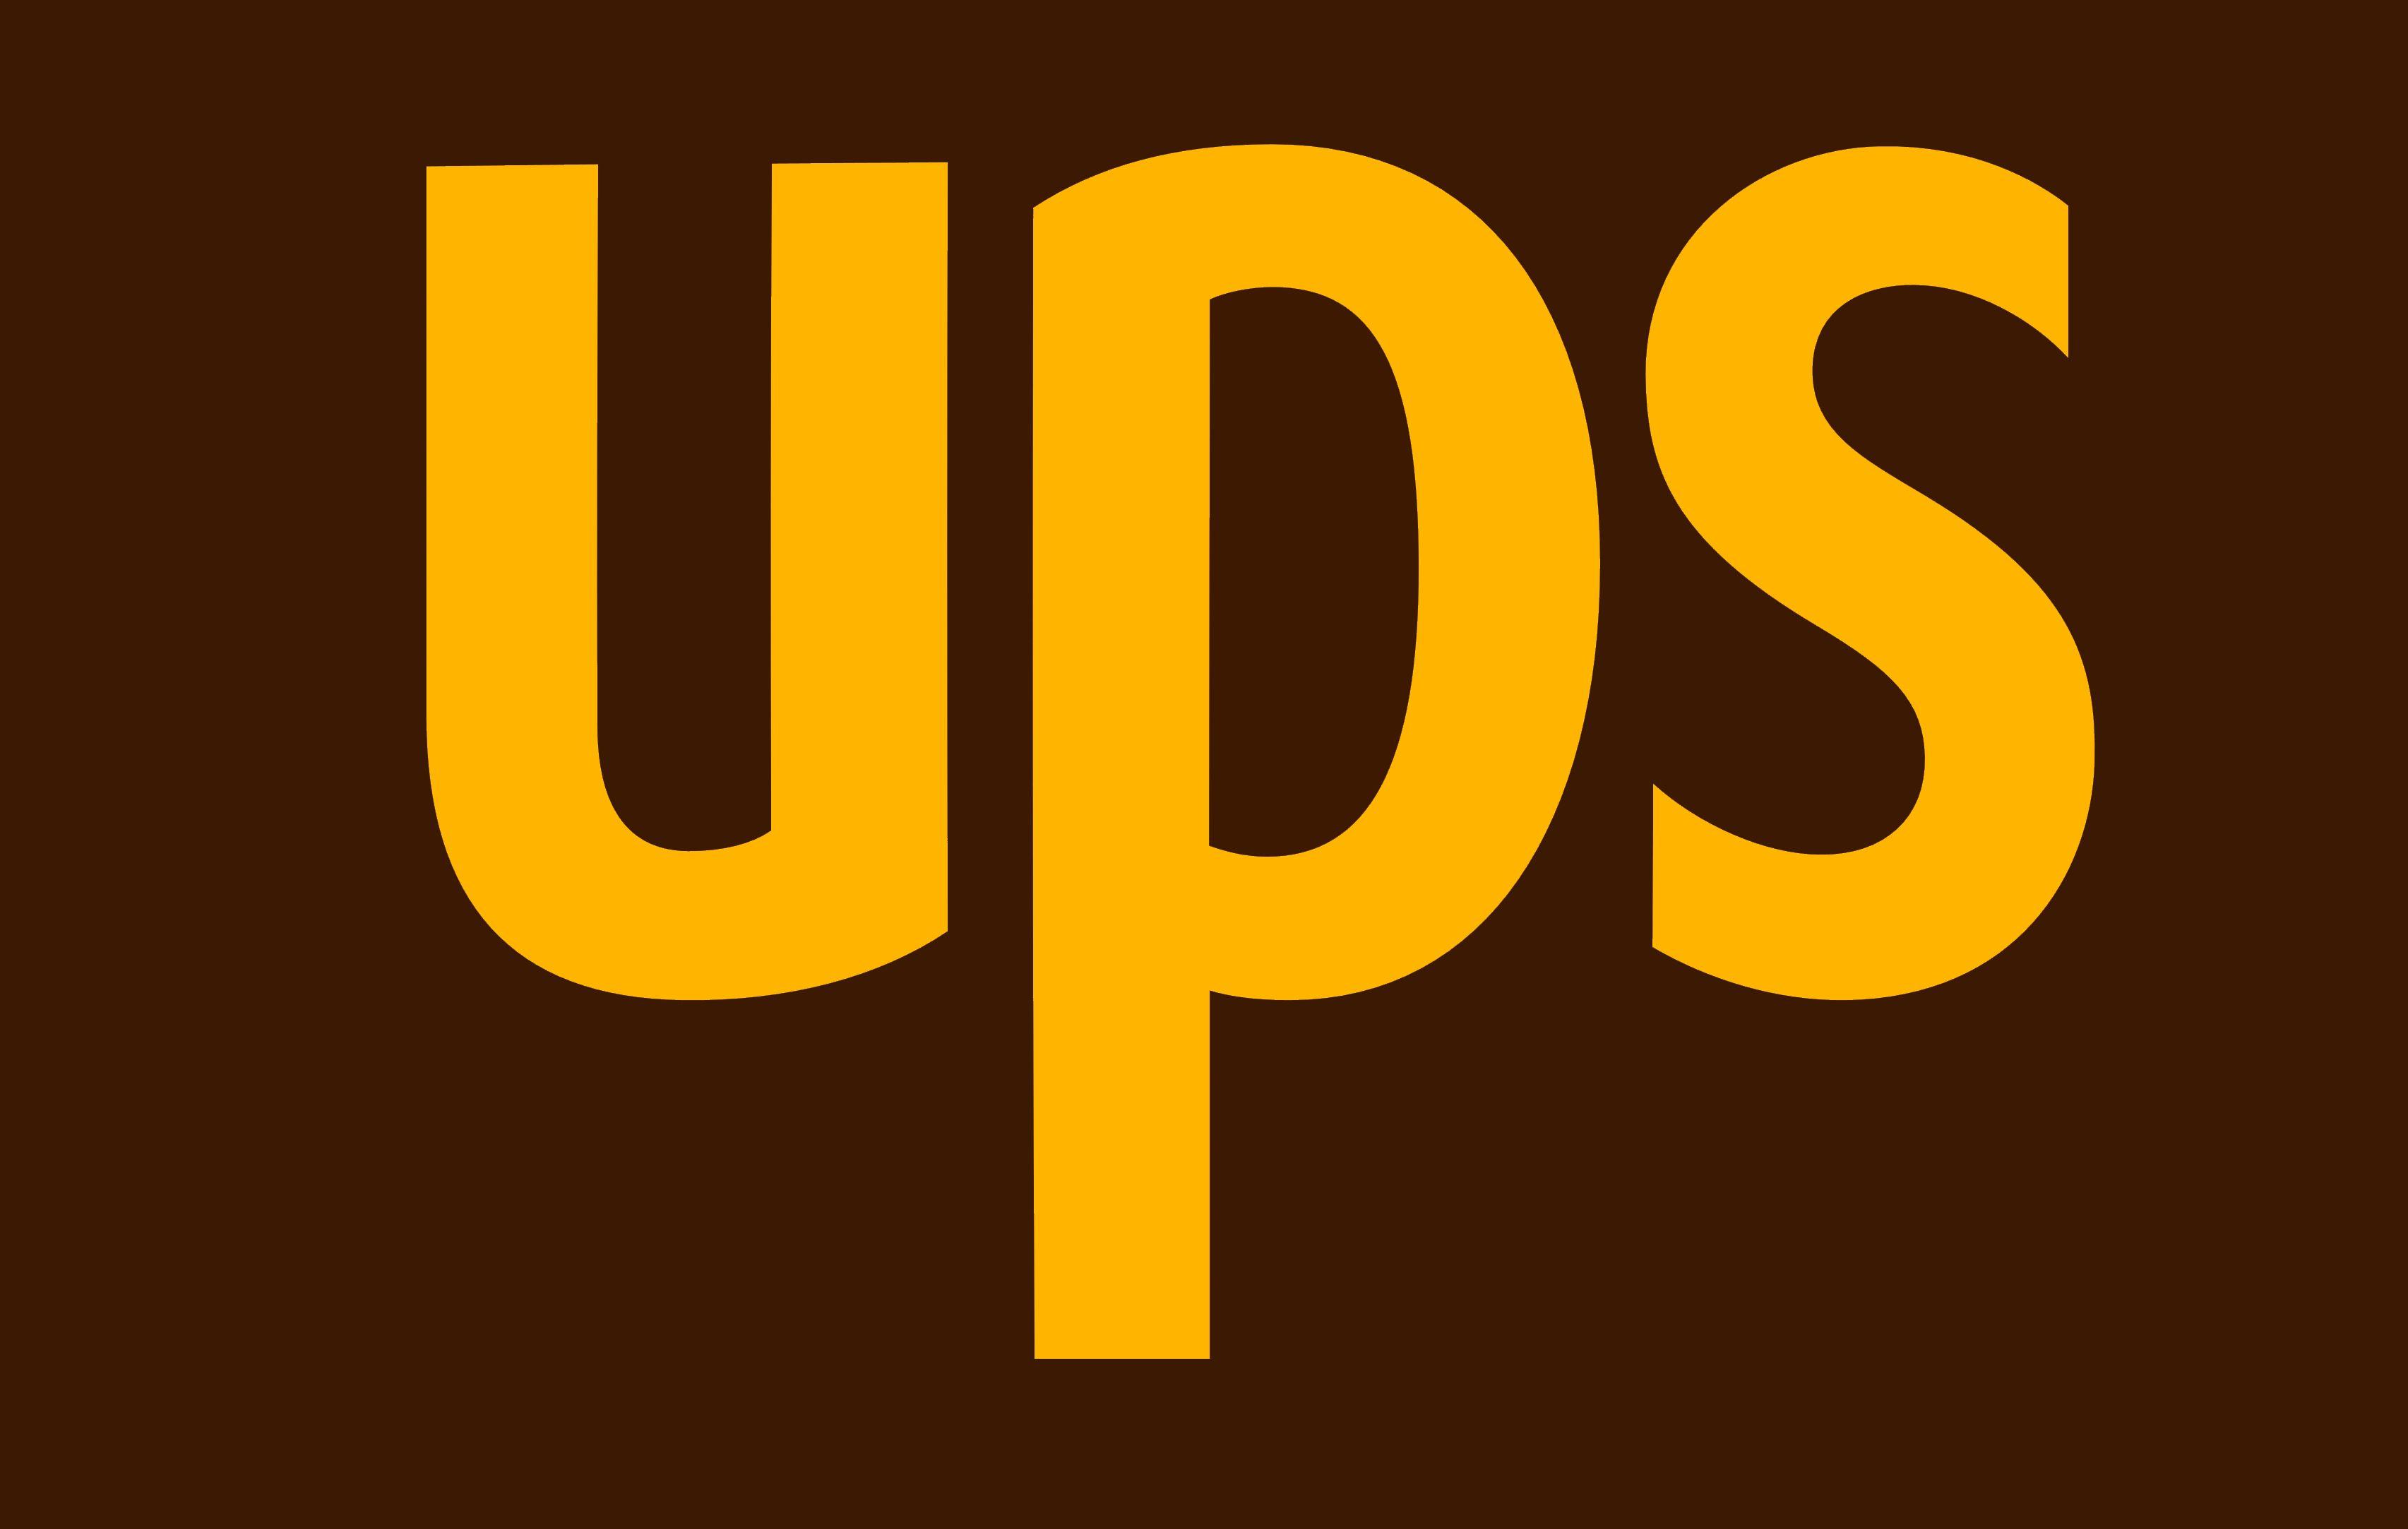 Ups.com Logo - Meaning United Parcel Service logo and symbol. history and evolution